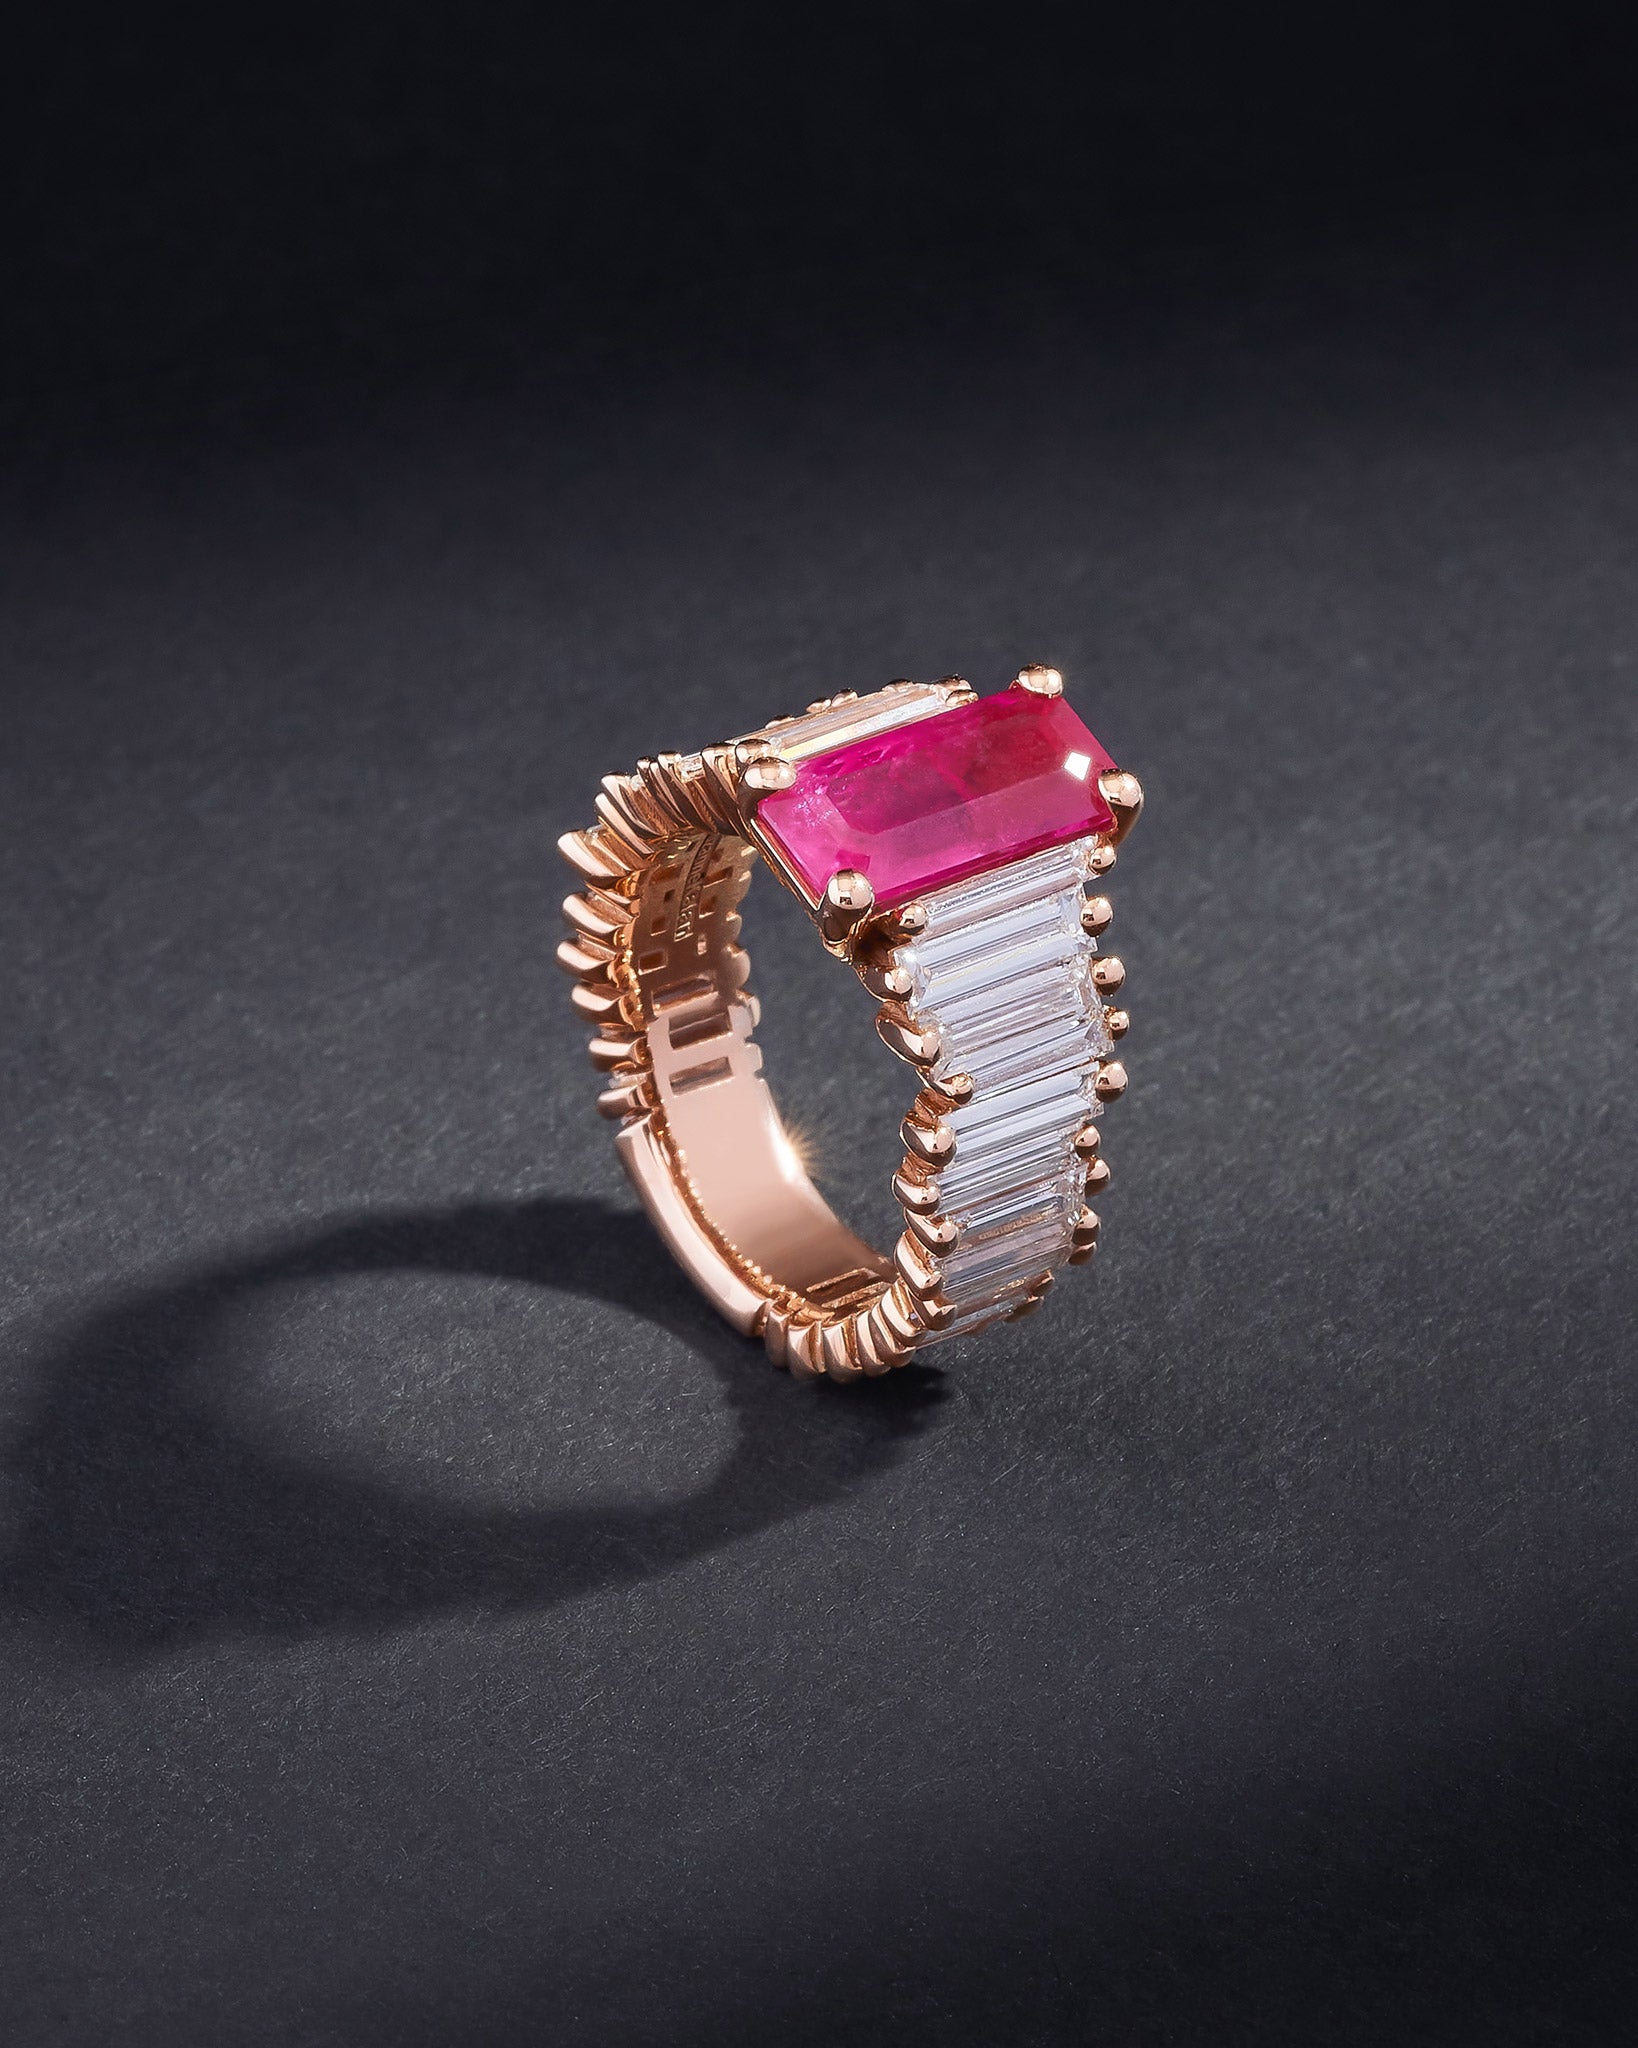 Suzanne Kalan One of a Kind Ruby Sunset Ring in 18k rose gold